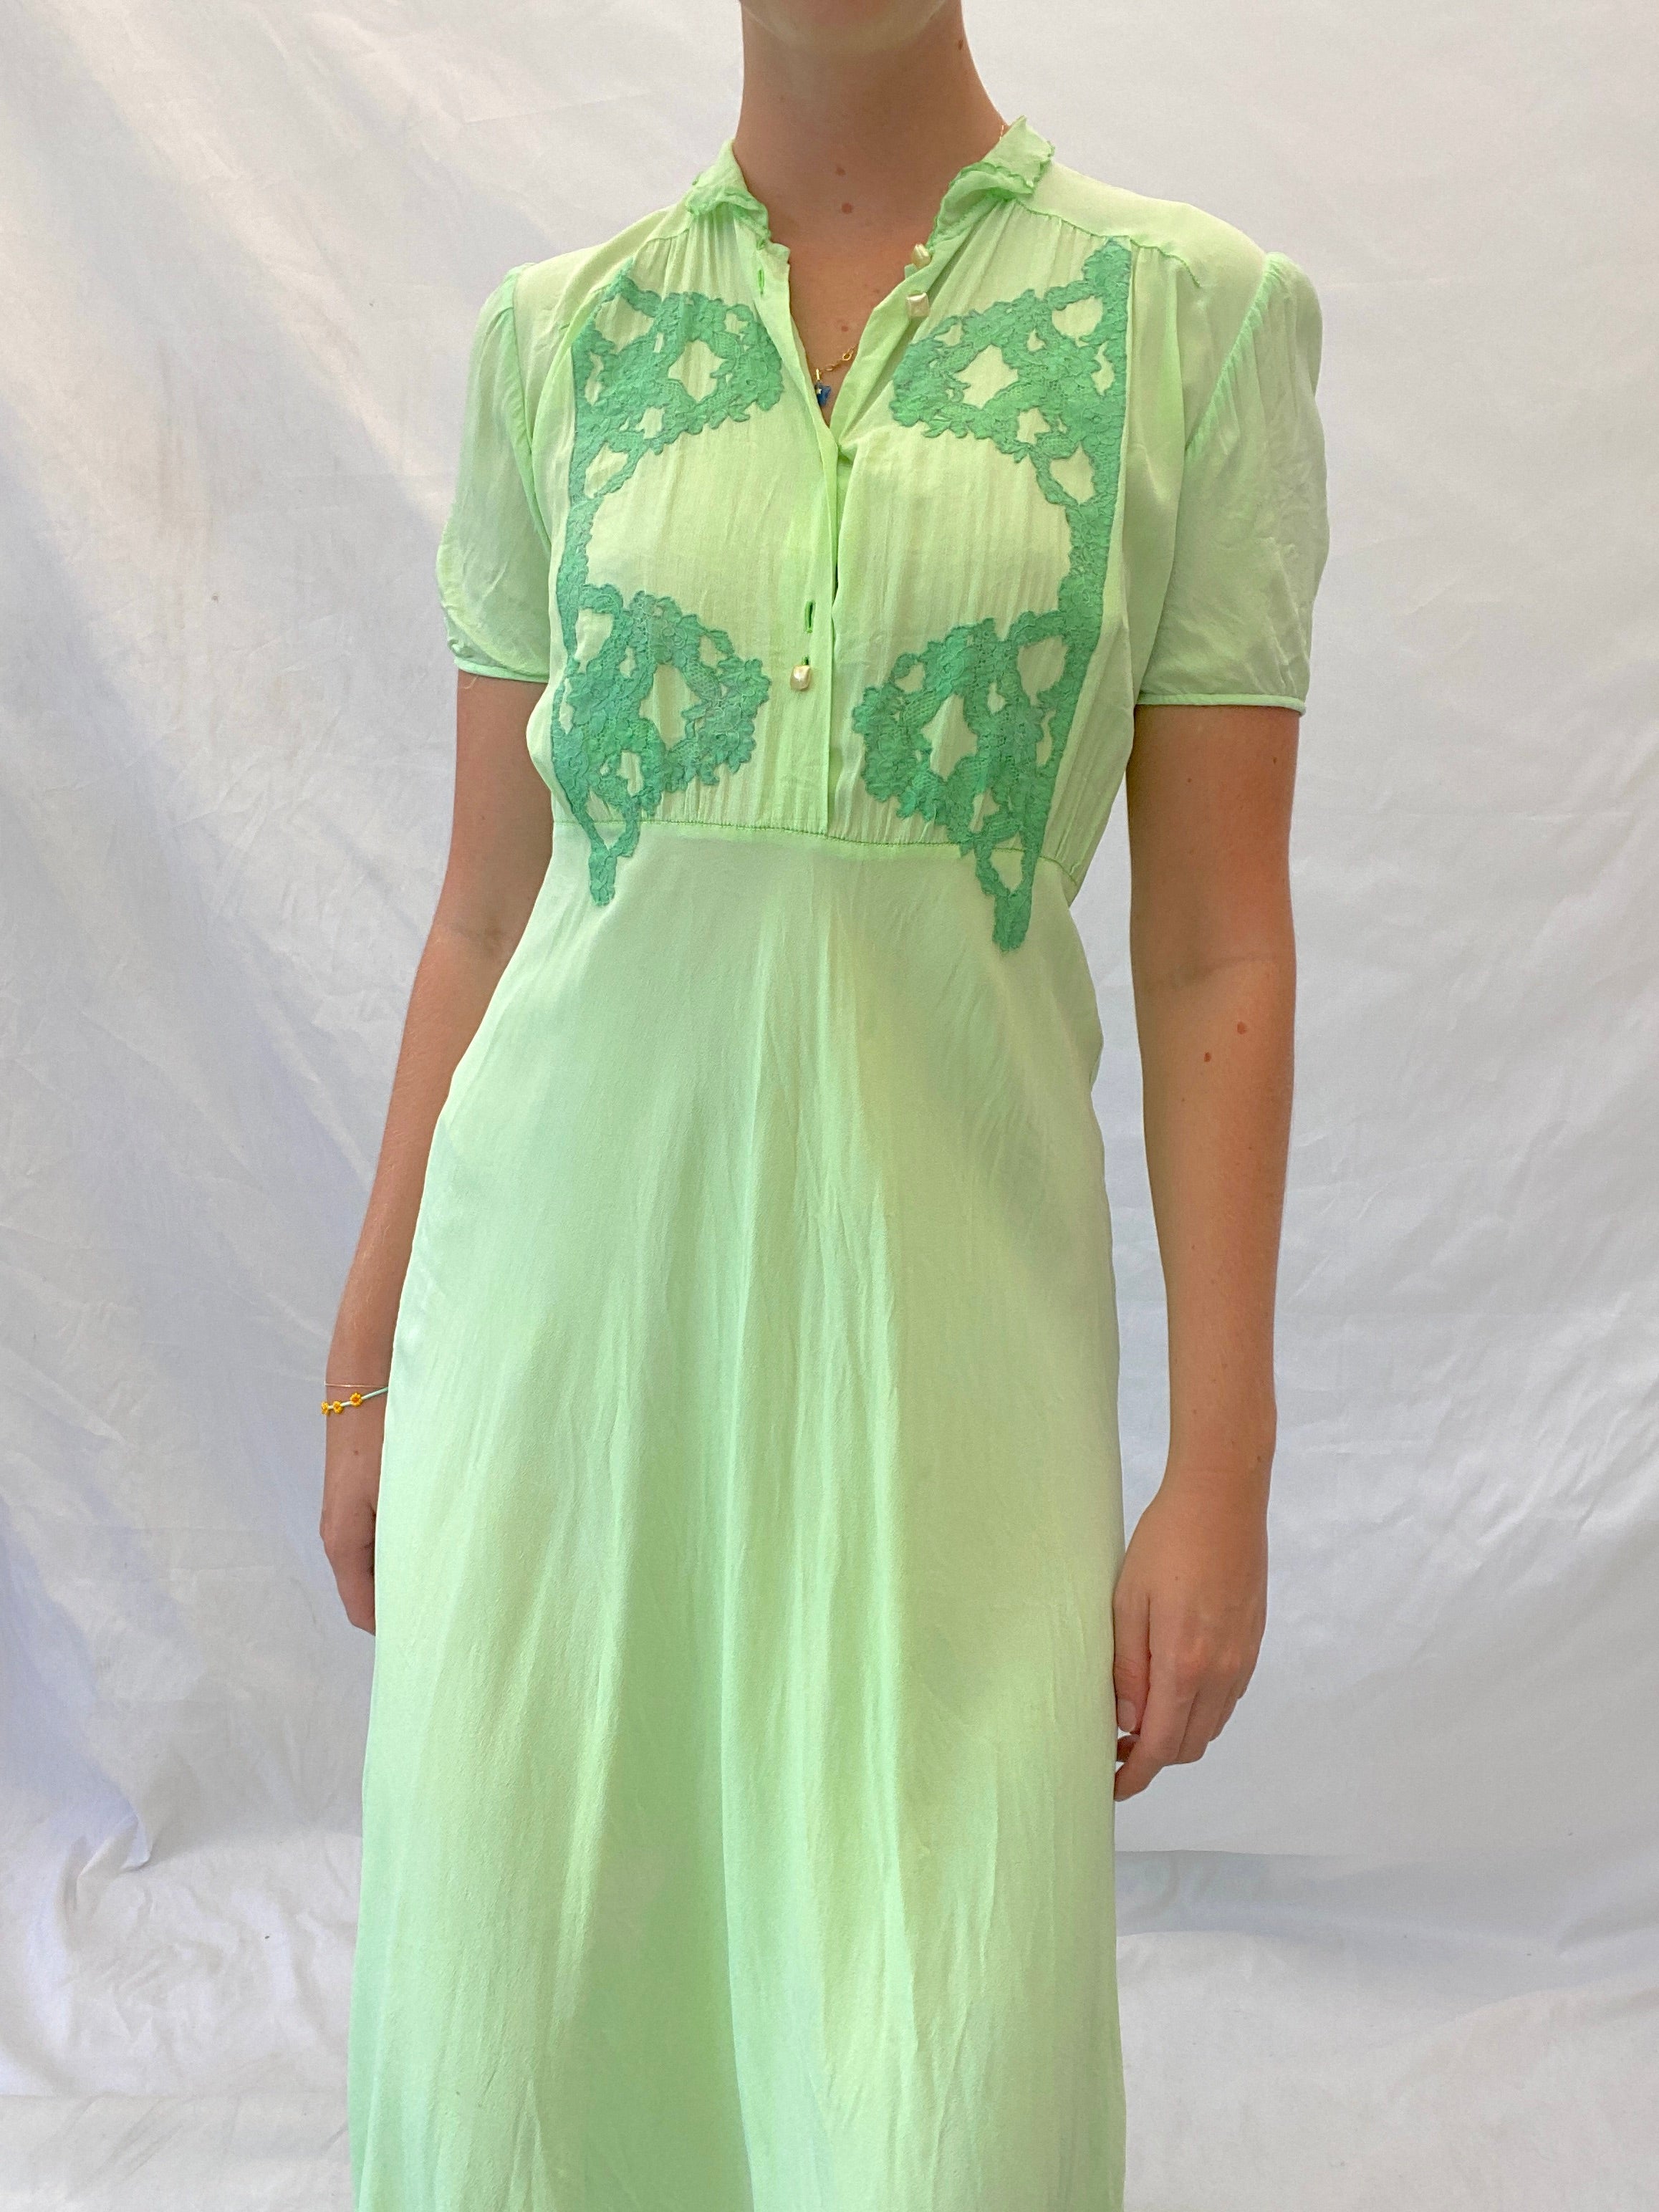 Hand Dyed Bright Green Short Sleeve Silk Dress with Lace